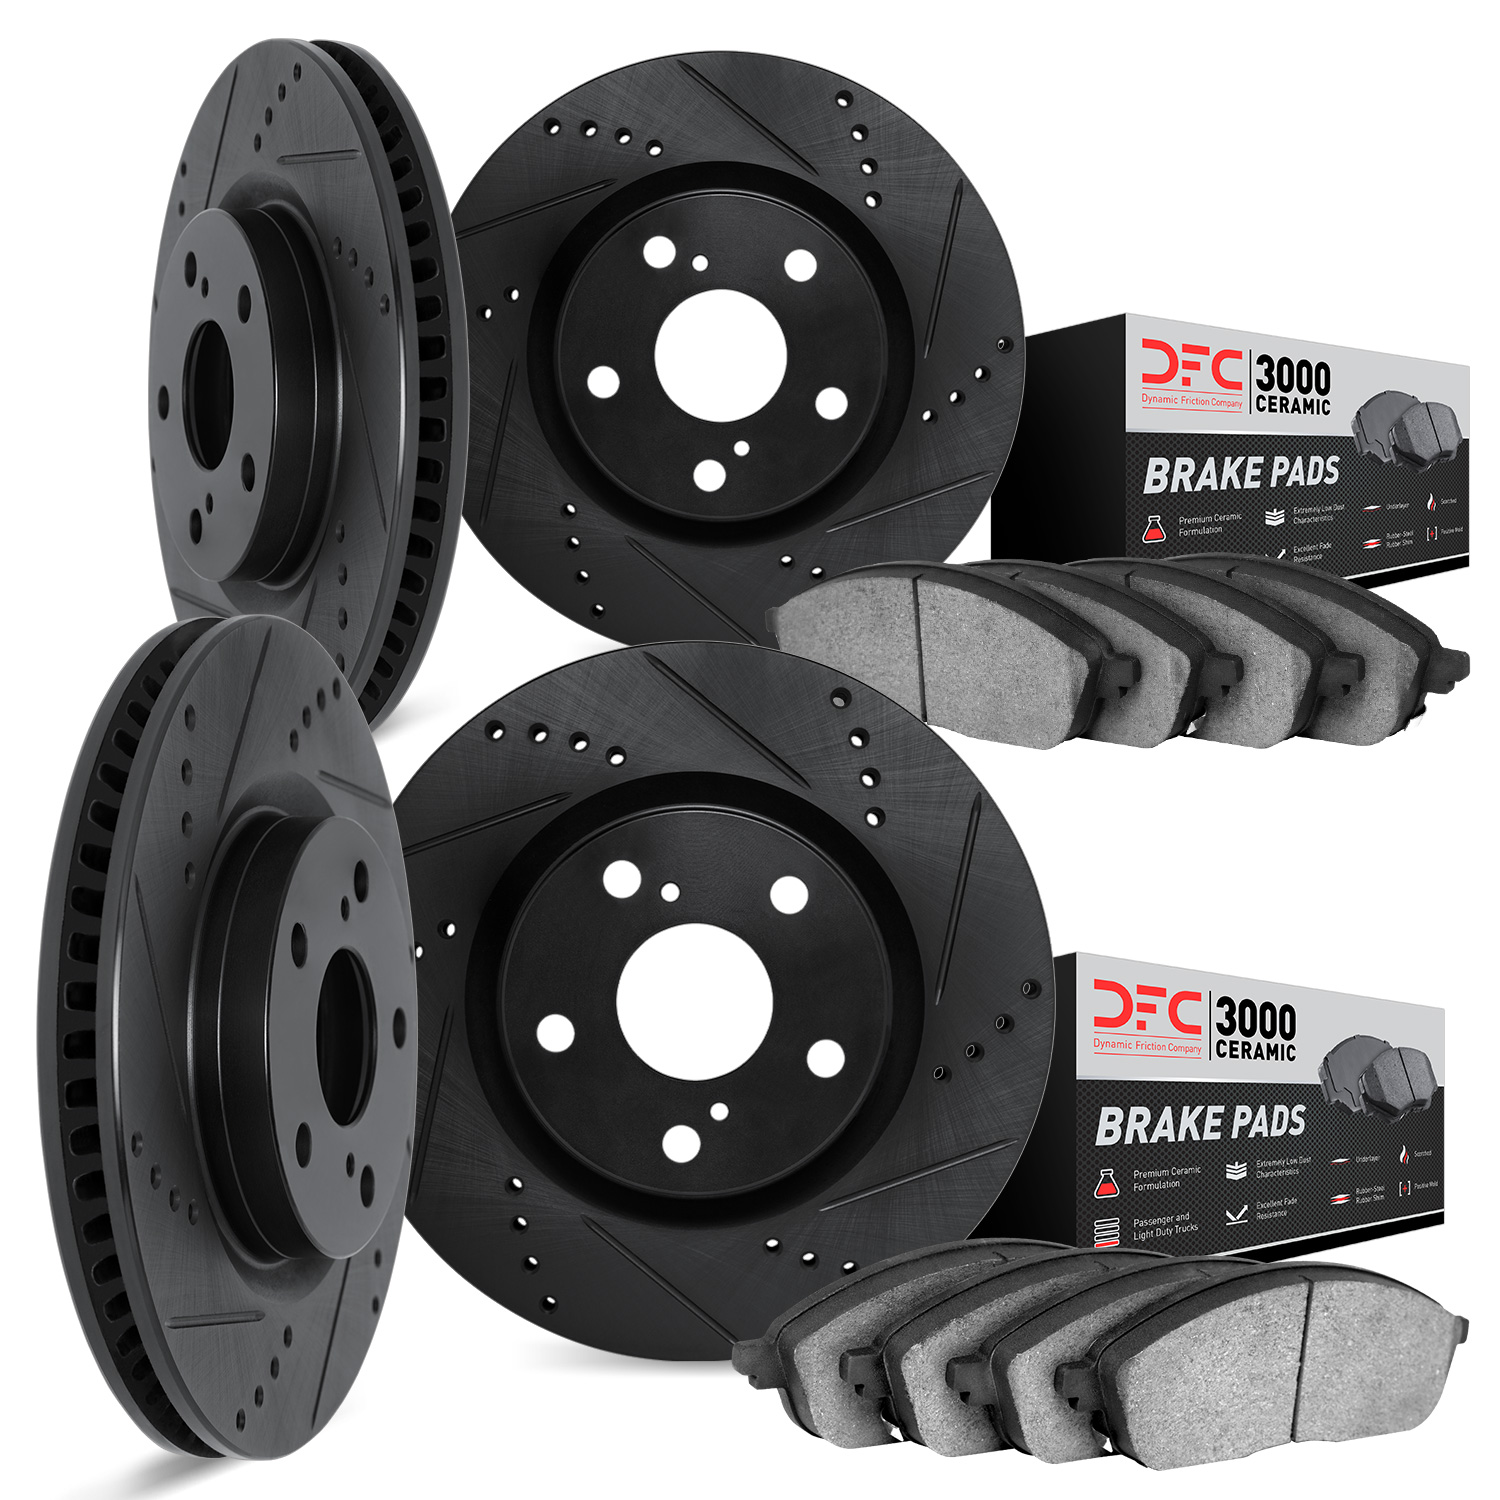 8304-48002 Drilled/Slotted Brake Rotors with 3000-Series Ceramic Brake Pads Kit [Black], 1997-2005 GM, Position: Front and Rear